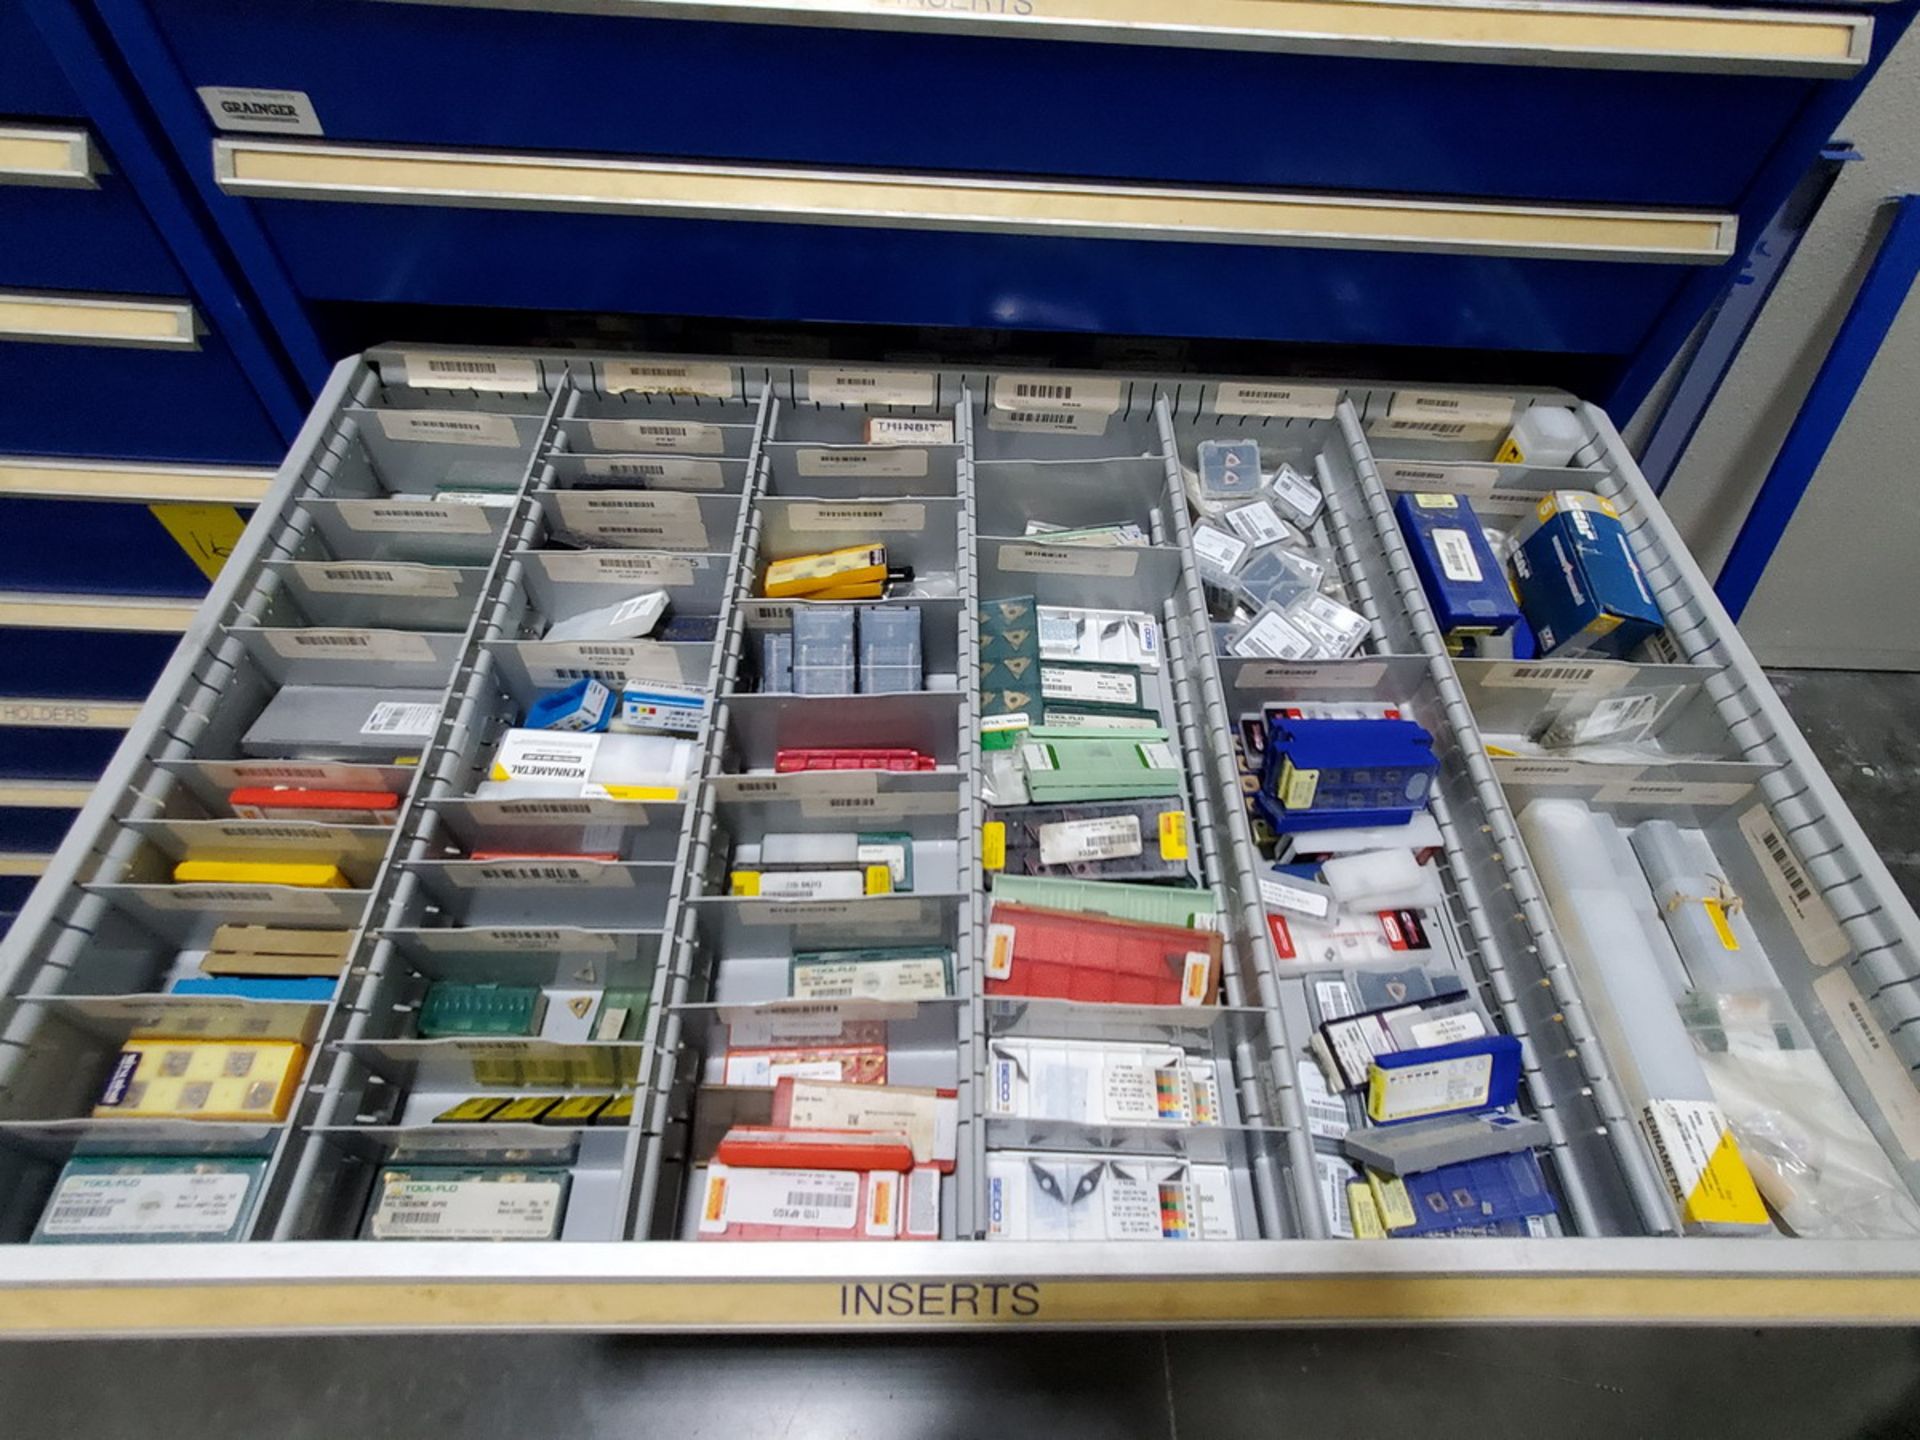 Modular Drawer Cabinet To Include But Not Limited To: Boring Bars, Carbide Tools, Sumitom Thread - Image 31 of 83